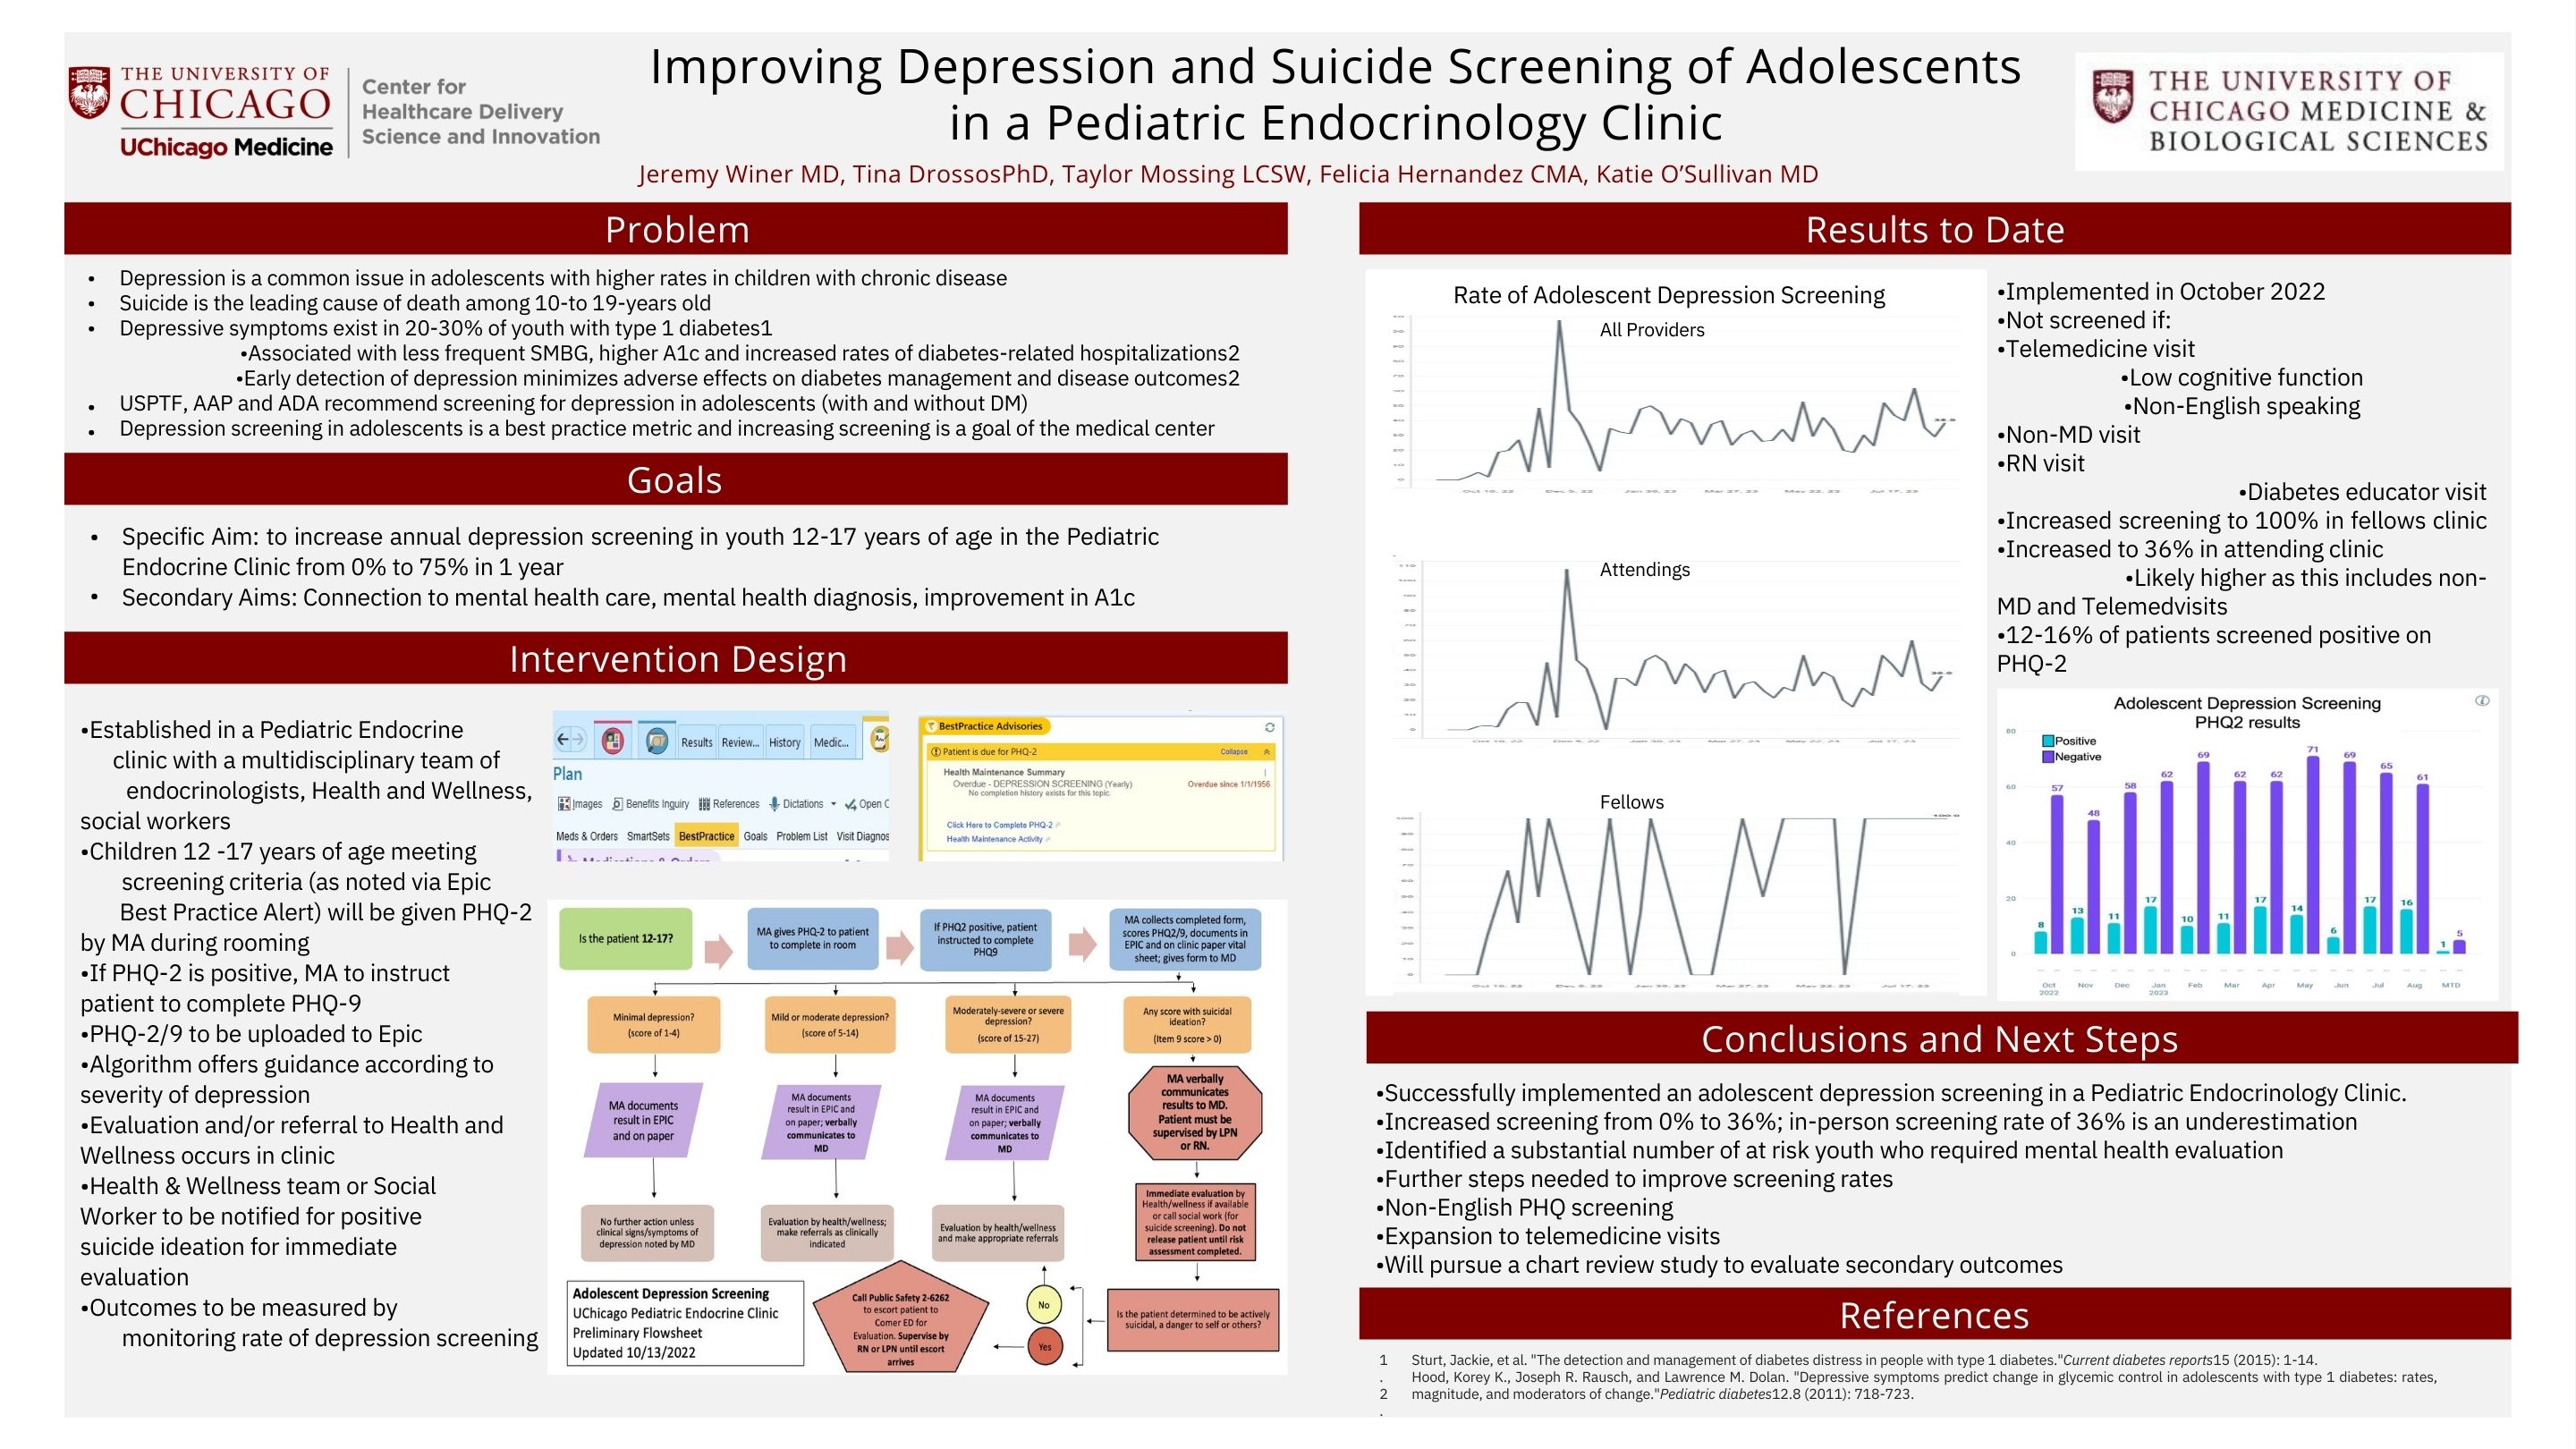 WINER_Improving Depression and Suicide Screening of Adolescents in a Pediatric Endocrinology Clinic.pdf